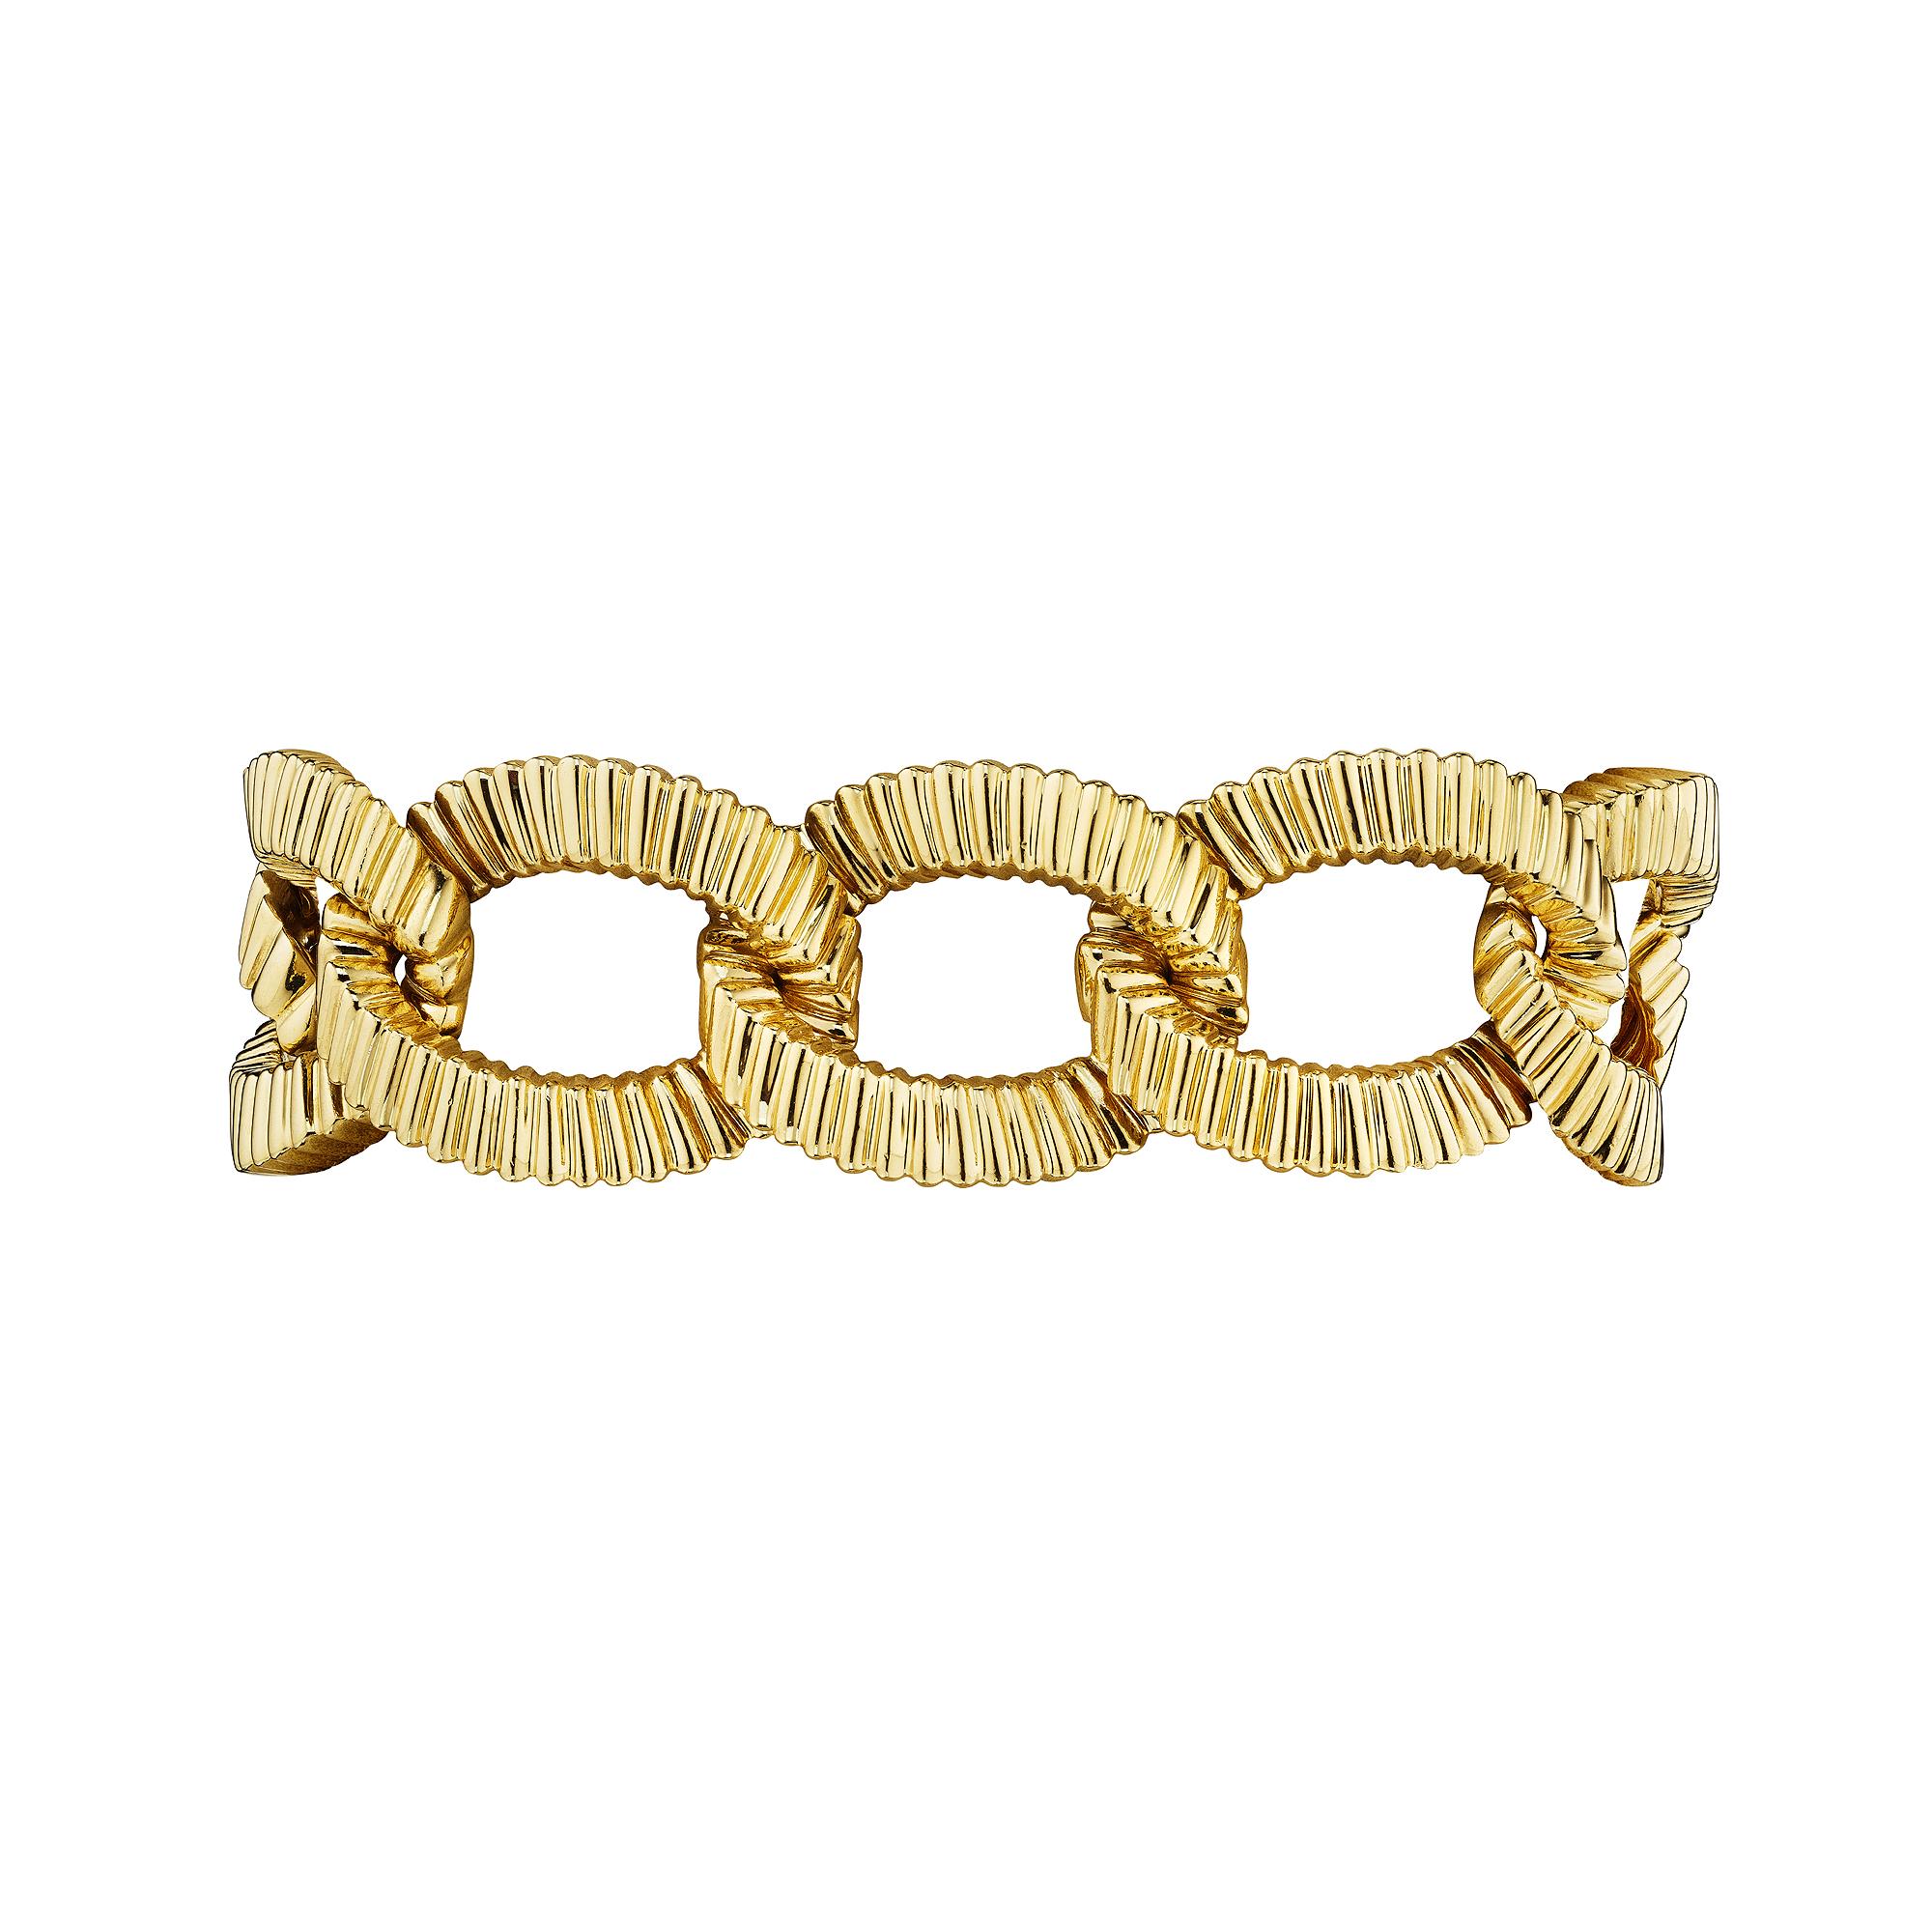 With a powerful spirit, this highly polished 18 karat yellow gold Tiffany & Co. modernist textured link bracelet sensually moves with verve.  Signed Tiffany & Co. 1998.  Circa 1998.  7 1/2